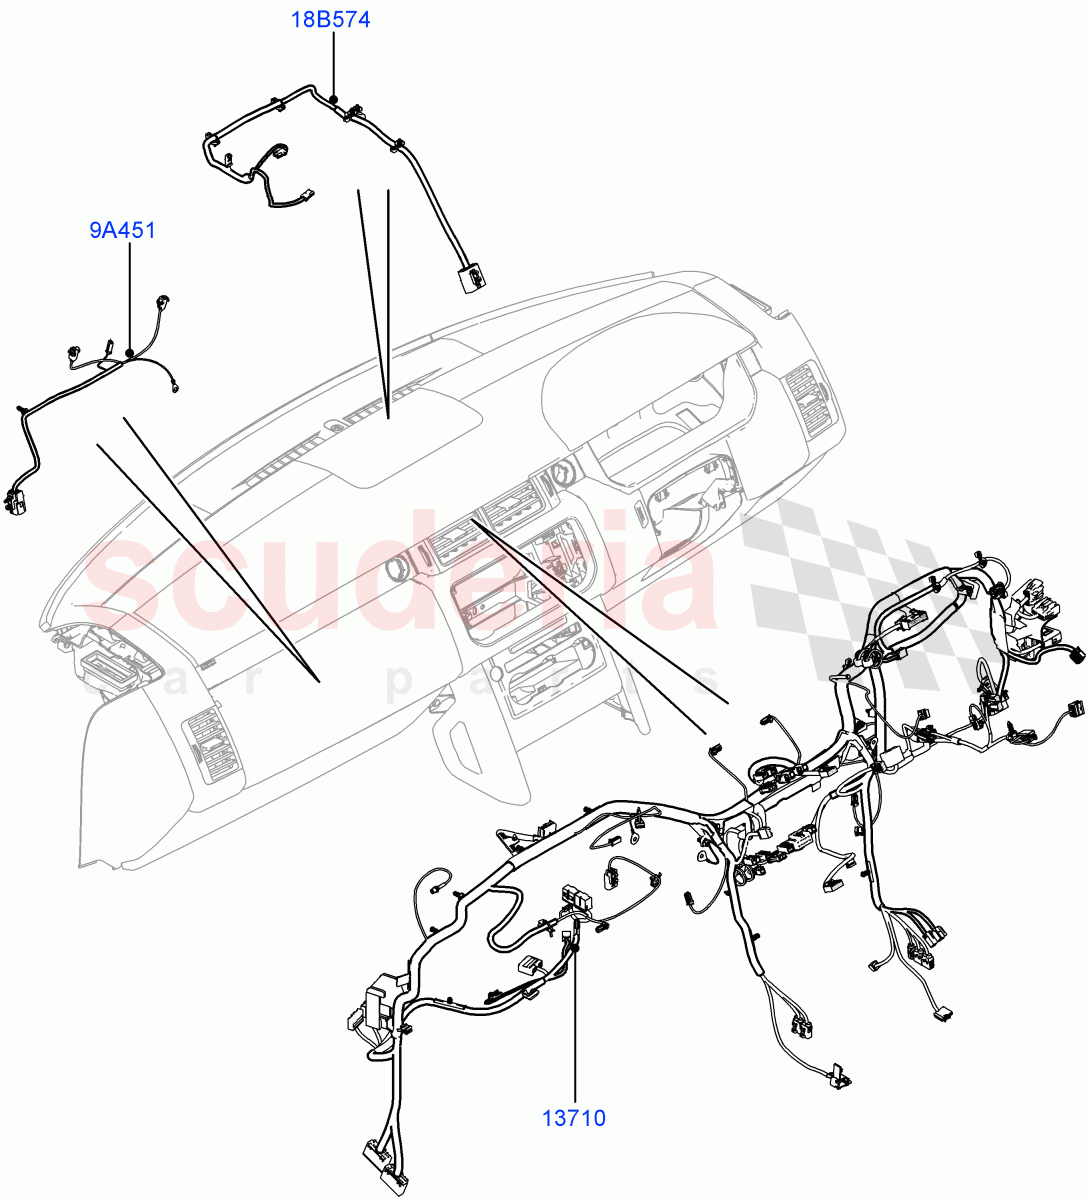 Electrical Wiring - Engine And Dash(Facia)(3.0 V6 Diesel Electric Hybrid Eng)((V)FROMFA000001,(V)TOFA999999) of Land Rover Land Rover Range Rover (2012-2021) [2.0 Turbo Petrol GTDI]